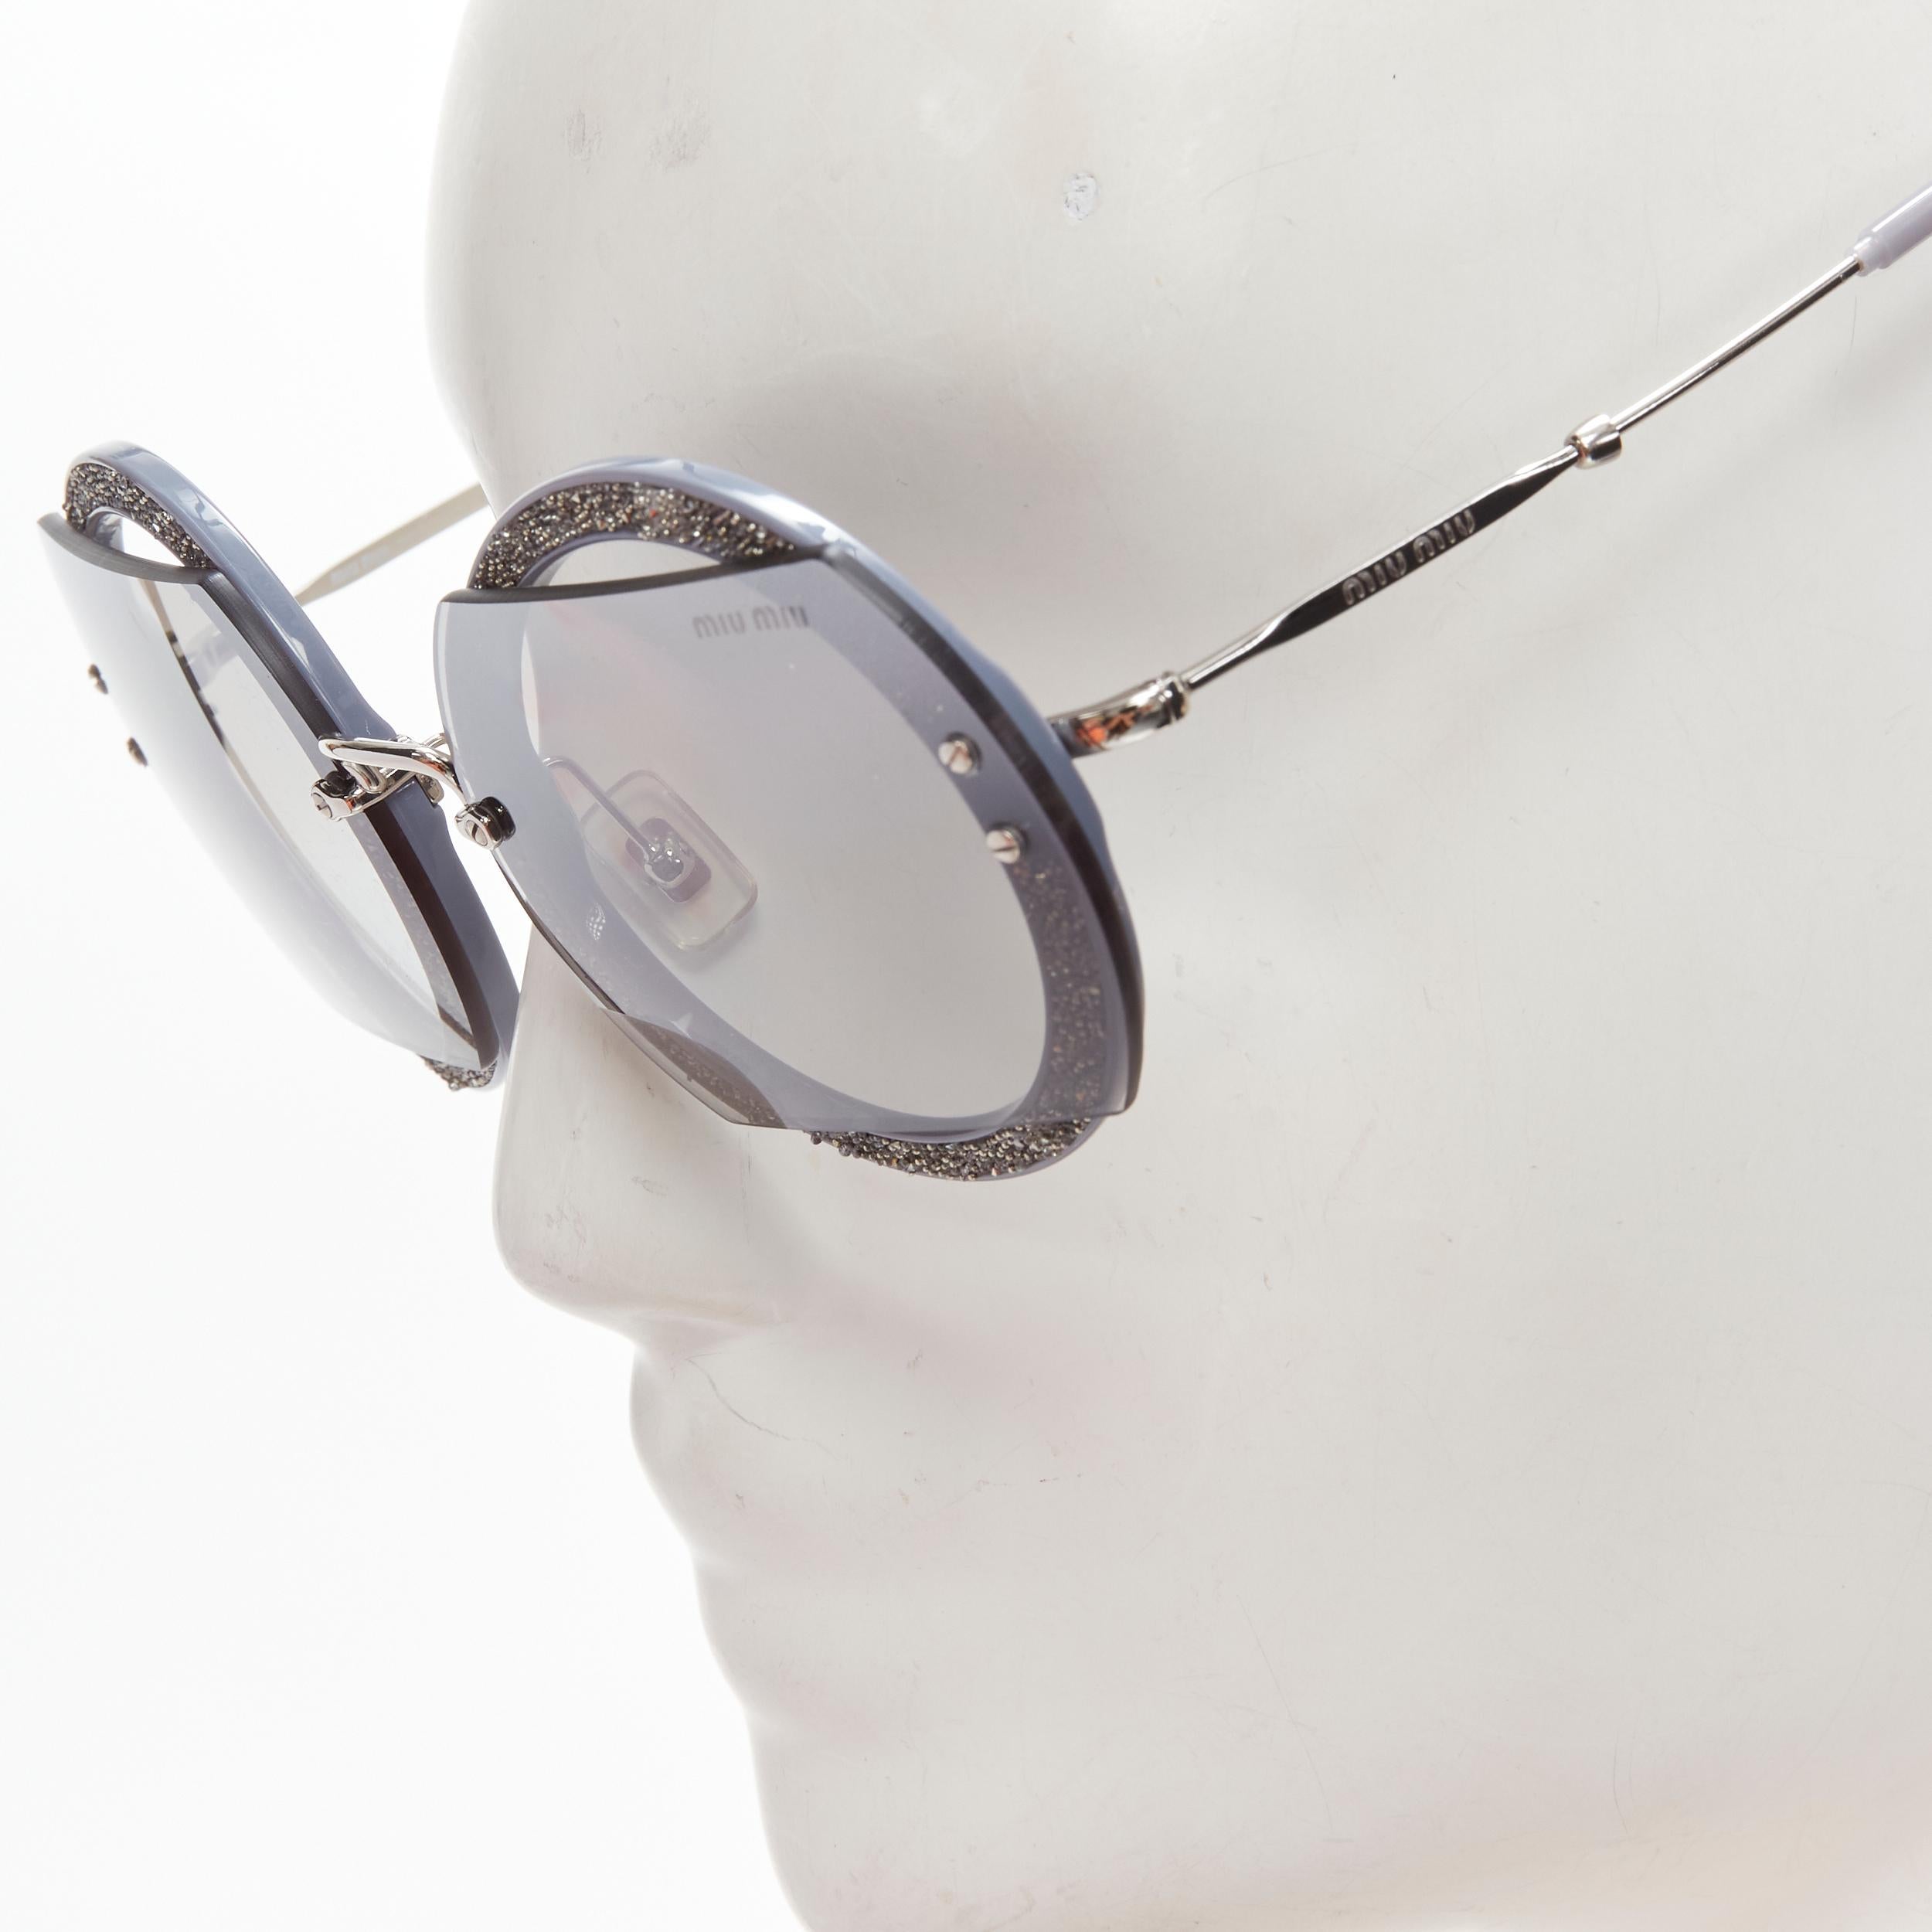 MIU MIU SMU06S dark silver embellished circle frame rounded sunglasses 
Reference: ANWU/A00066 
Brand: Miu Miu 
Designer: Miuccia Prada 
Material: Acetate 
Color: Silver 
Pattern: Solid 
Made in: Italy 


CONDITION: 
Condition: Excellent, this item